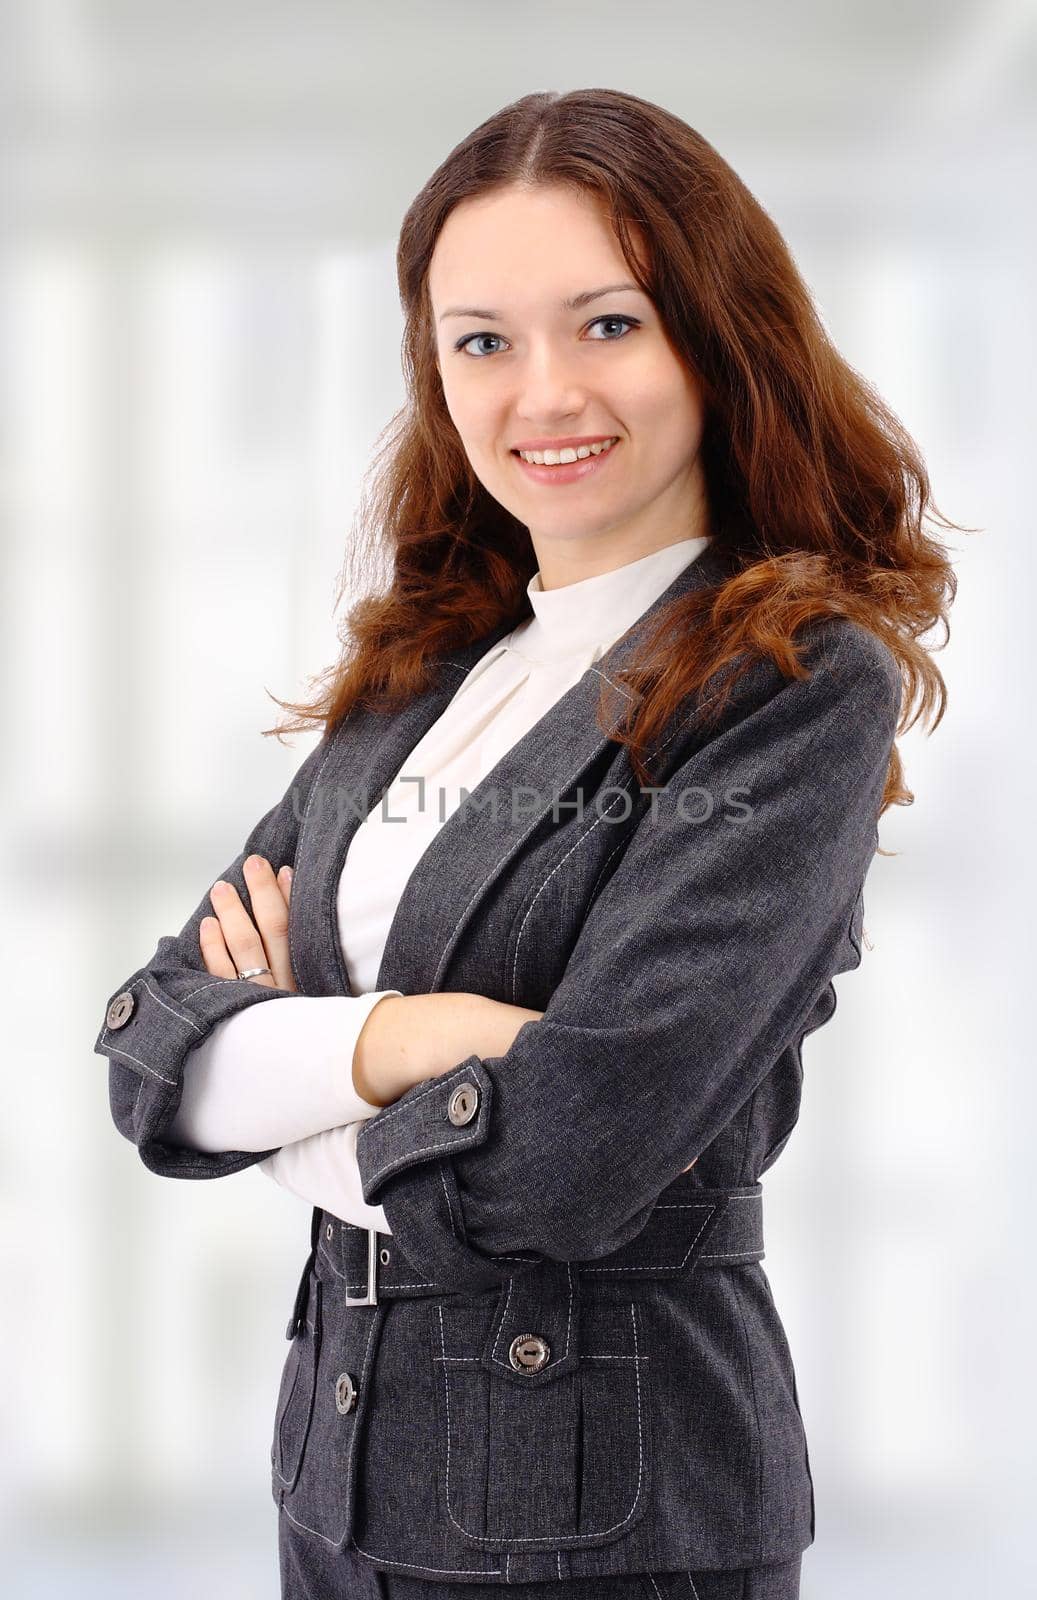 The beautiful business woman at office